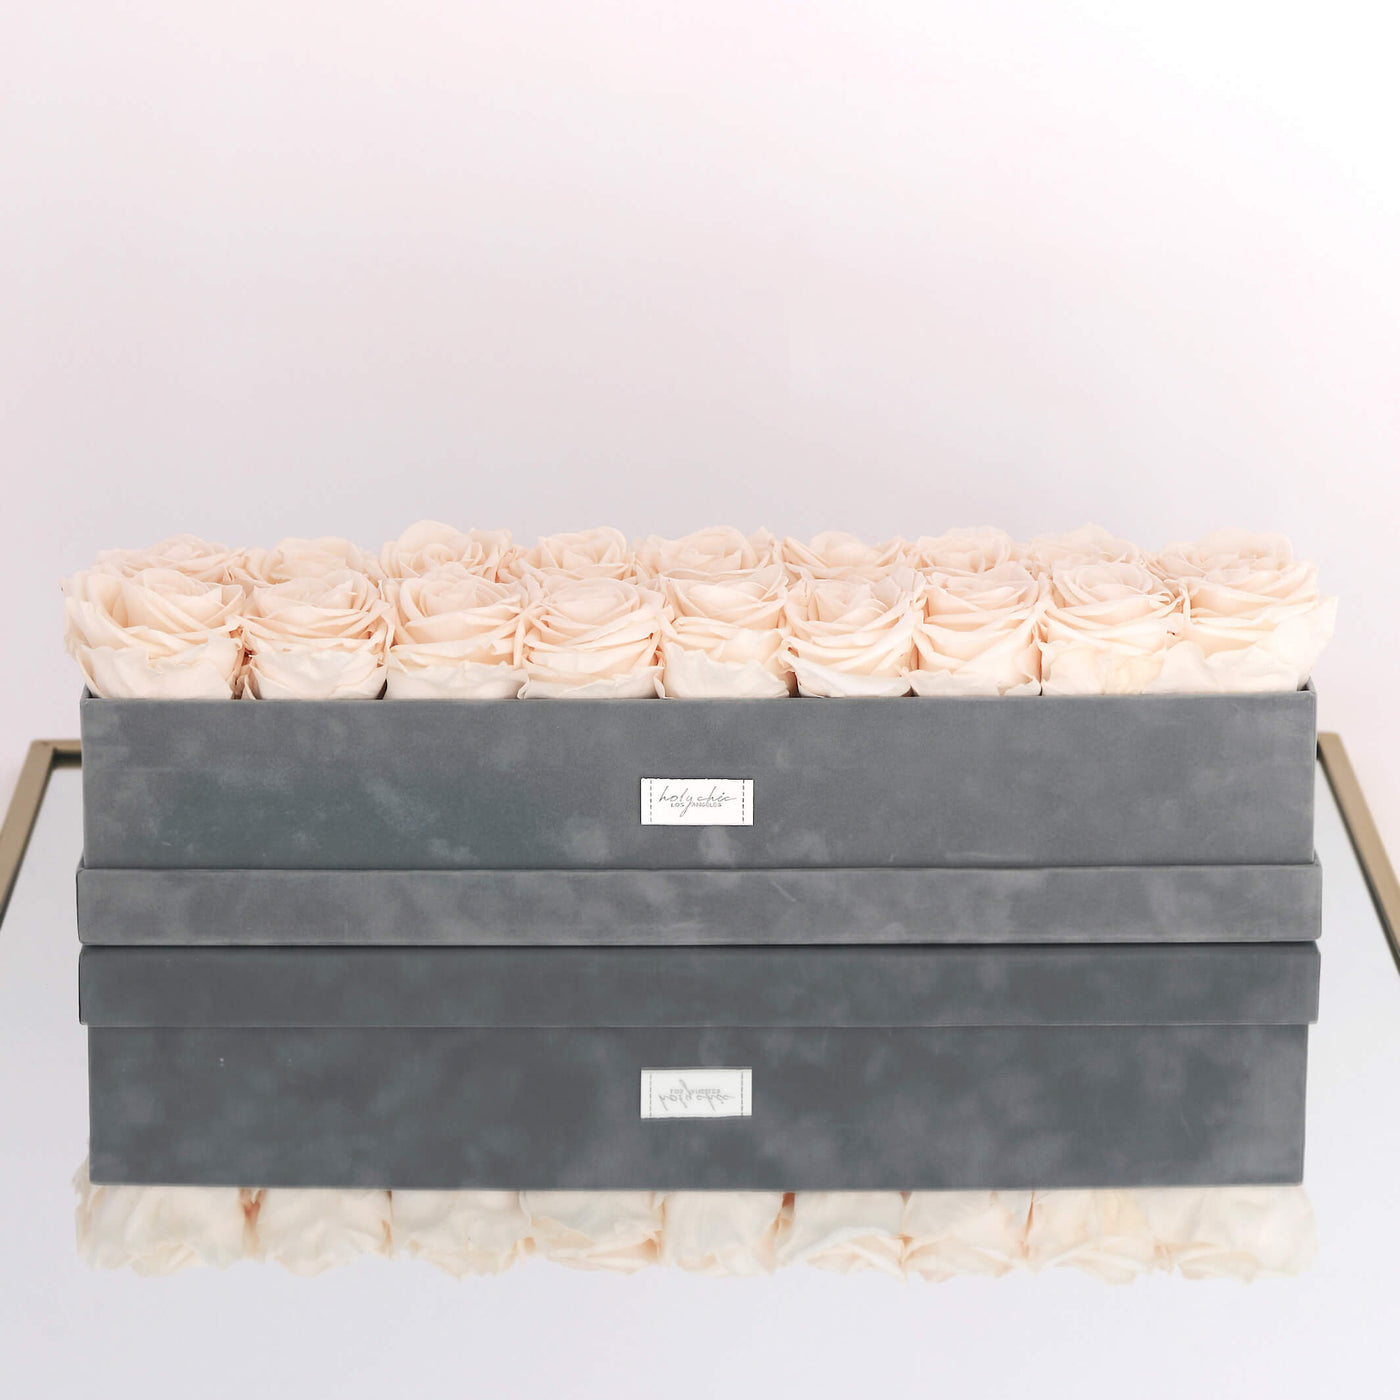 Forever roses set in a large rectangular suede box